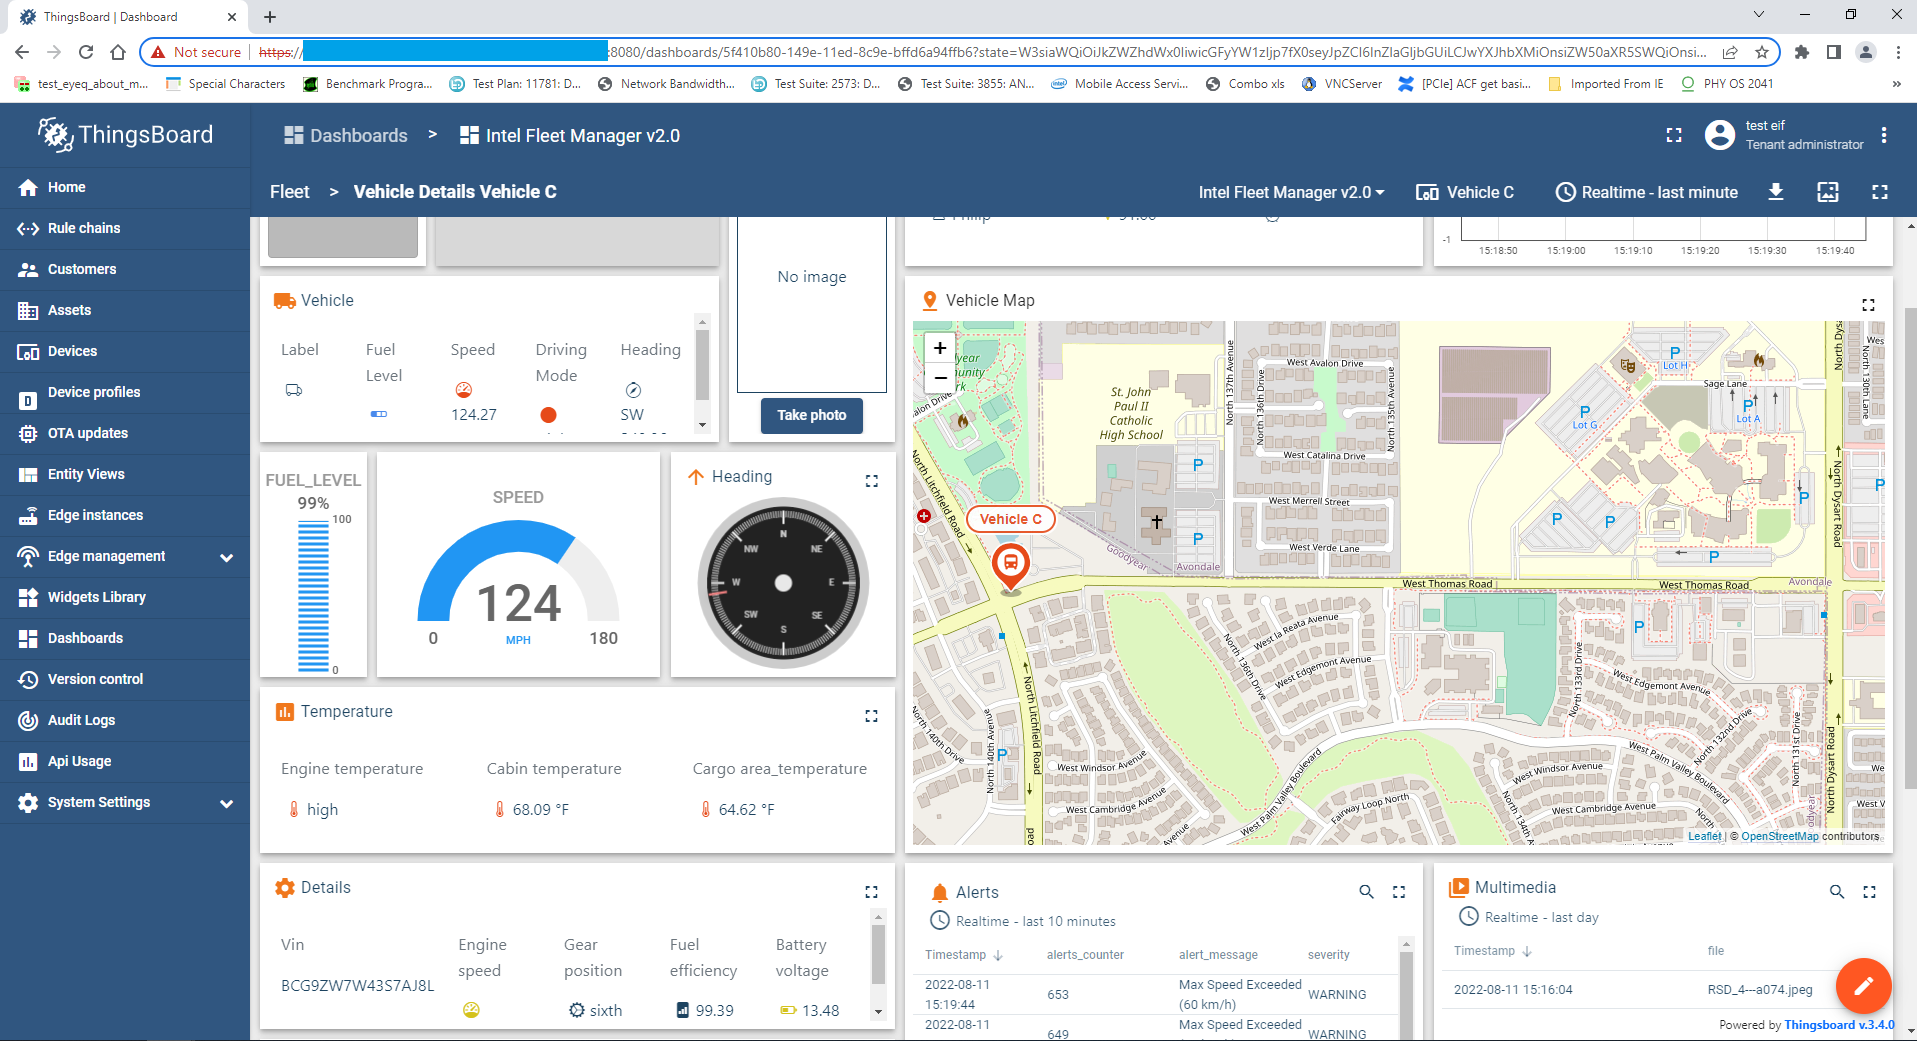 A browser window showing the ThingsBoard link with the Intel Fleet Manager dashboard in the main view. Several components are displayed, including Alerts, Temperature, and a map showing the vehicle location.